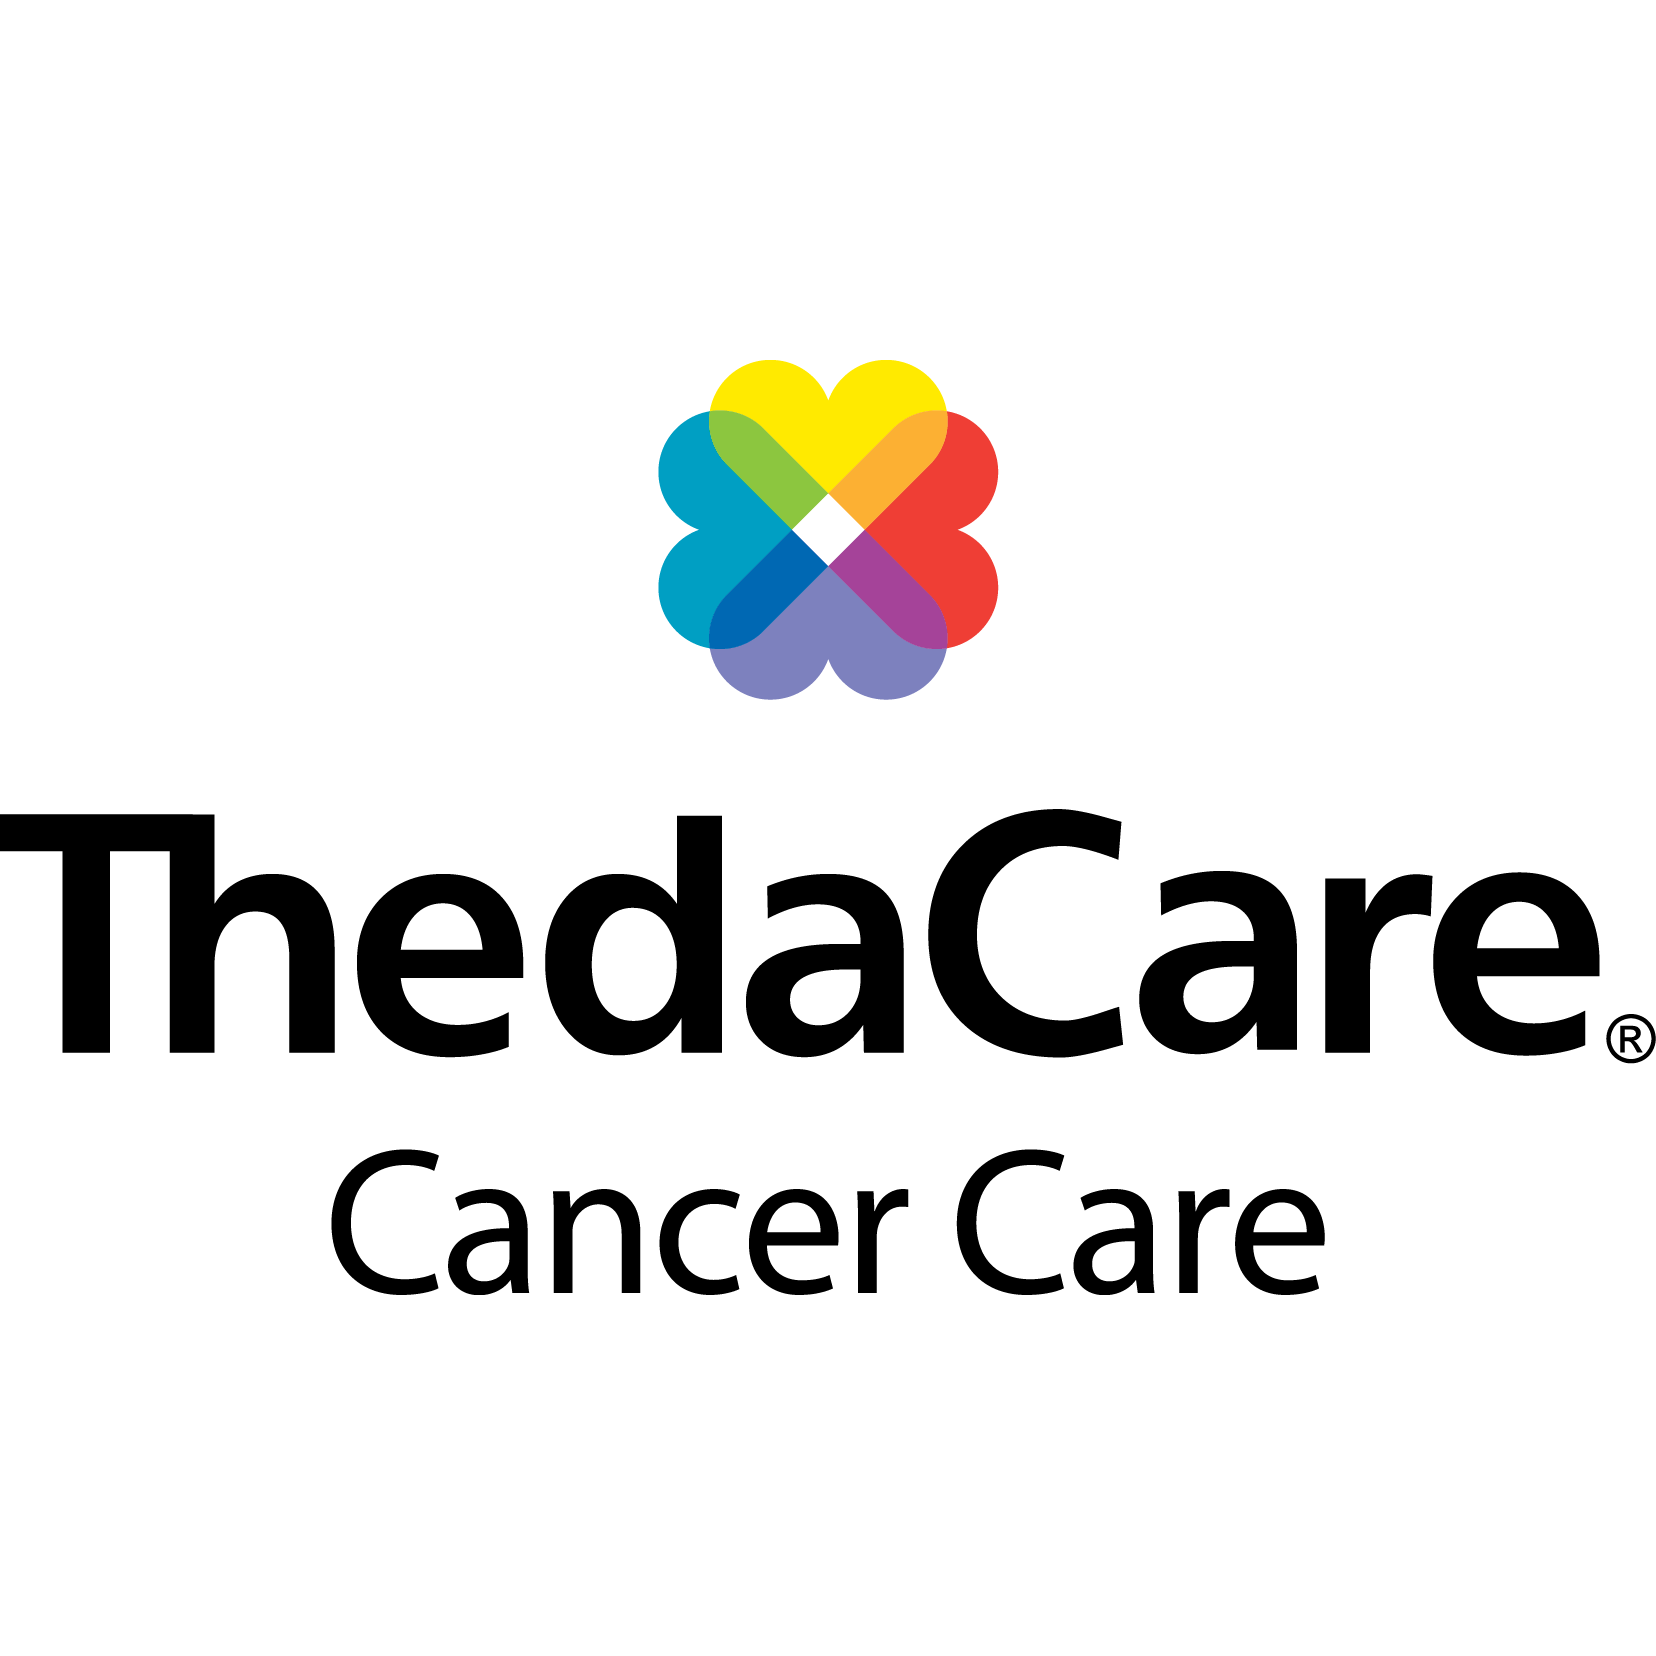 ThedaCare Cancer Care-Shawano